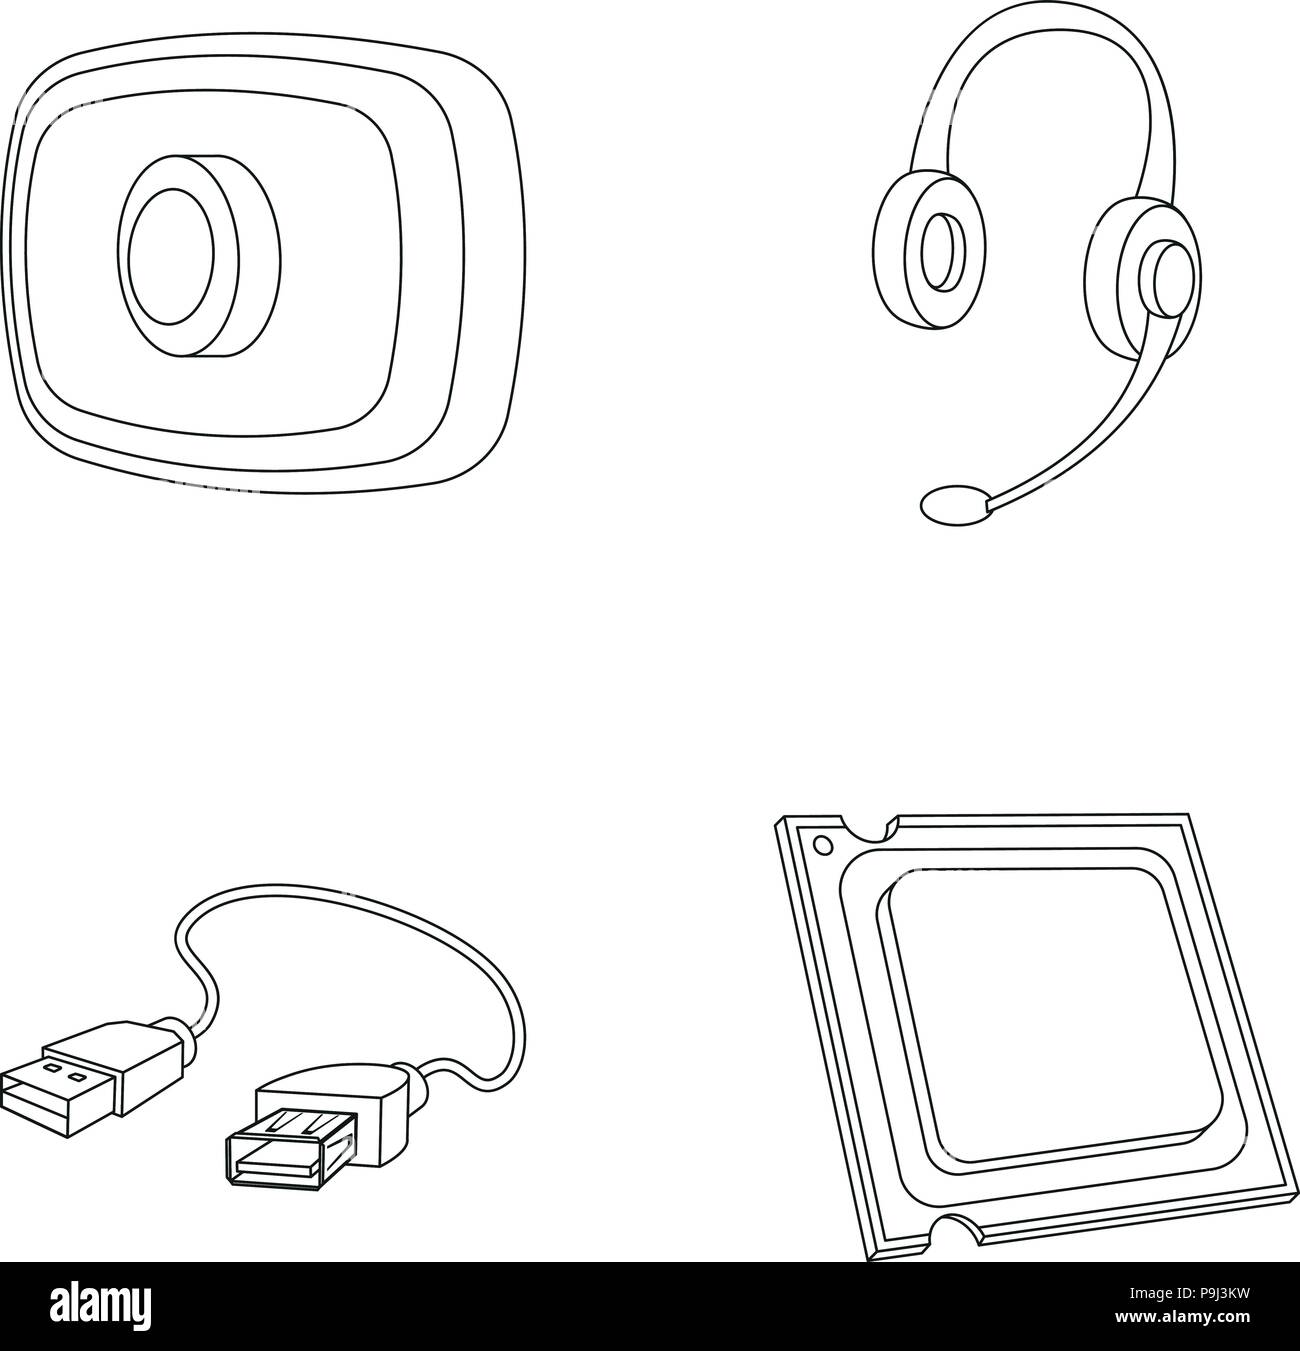 accessories ,business,cable,central,collection,computer,connection,earphone,entertainment,equipment,icon,illustration,information,isolated,knowledge,logo,music,outline,personal,processor,set,sign, skype,sound,source,study,symbol,usb,vector,vidio,web ...